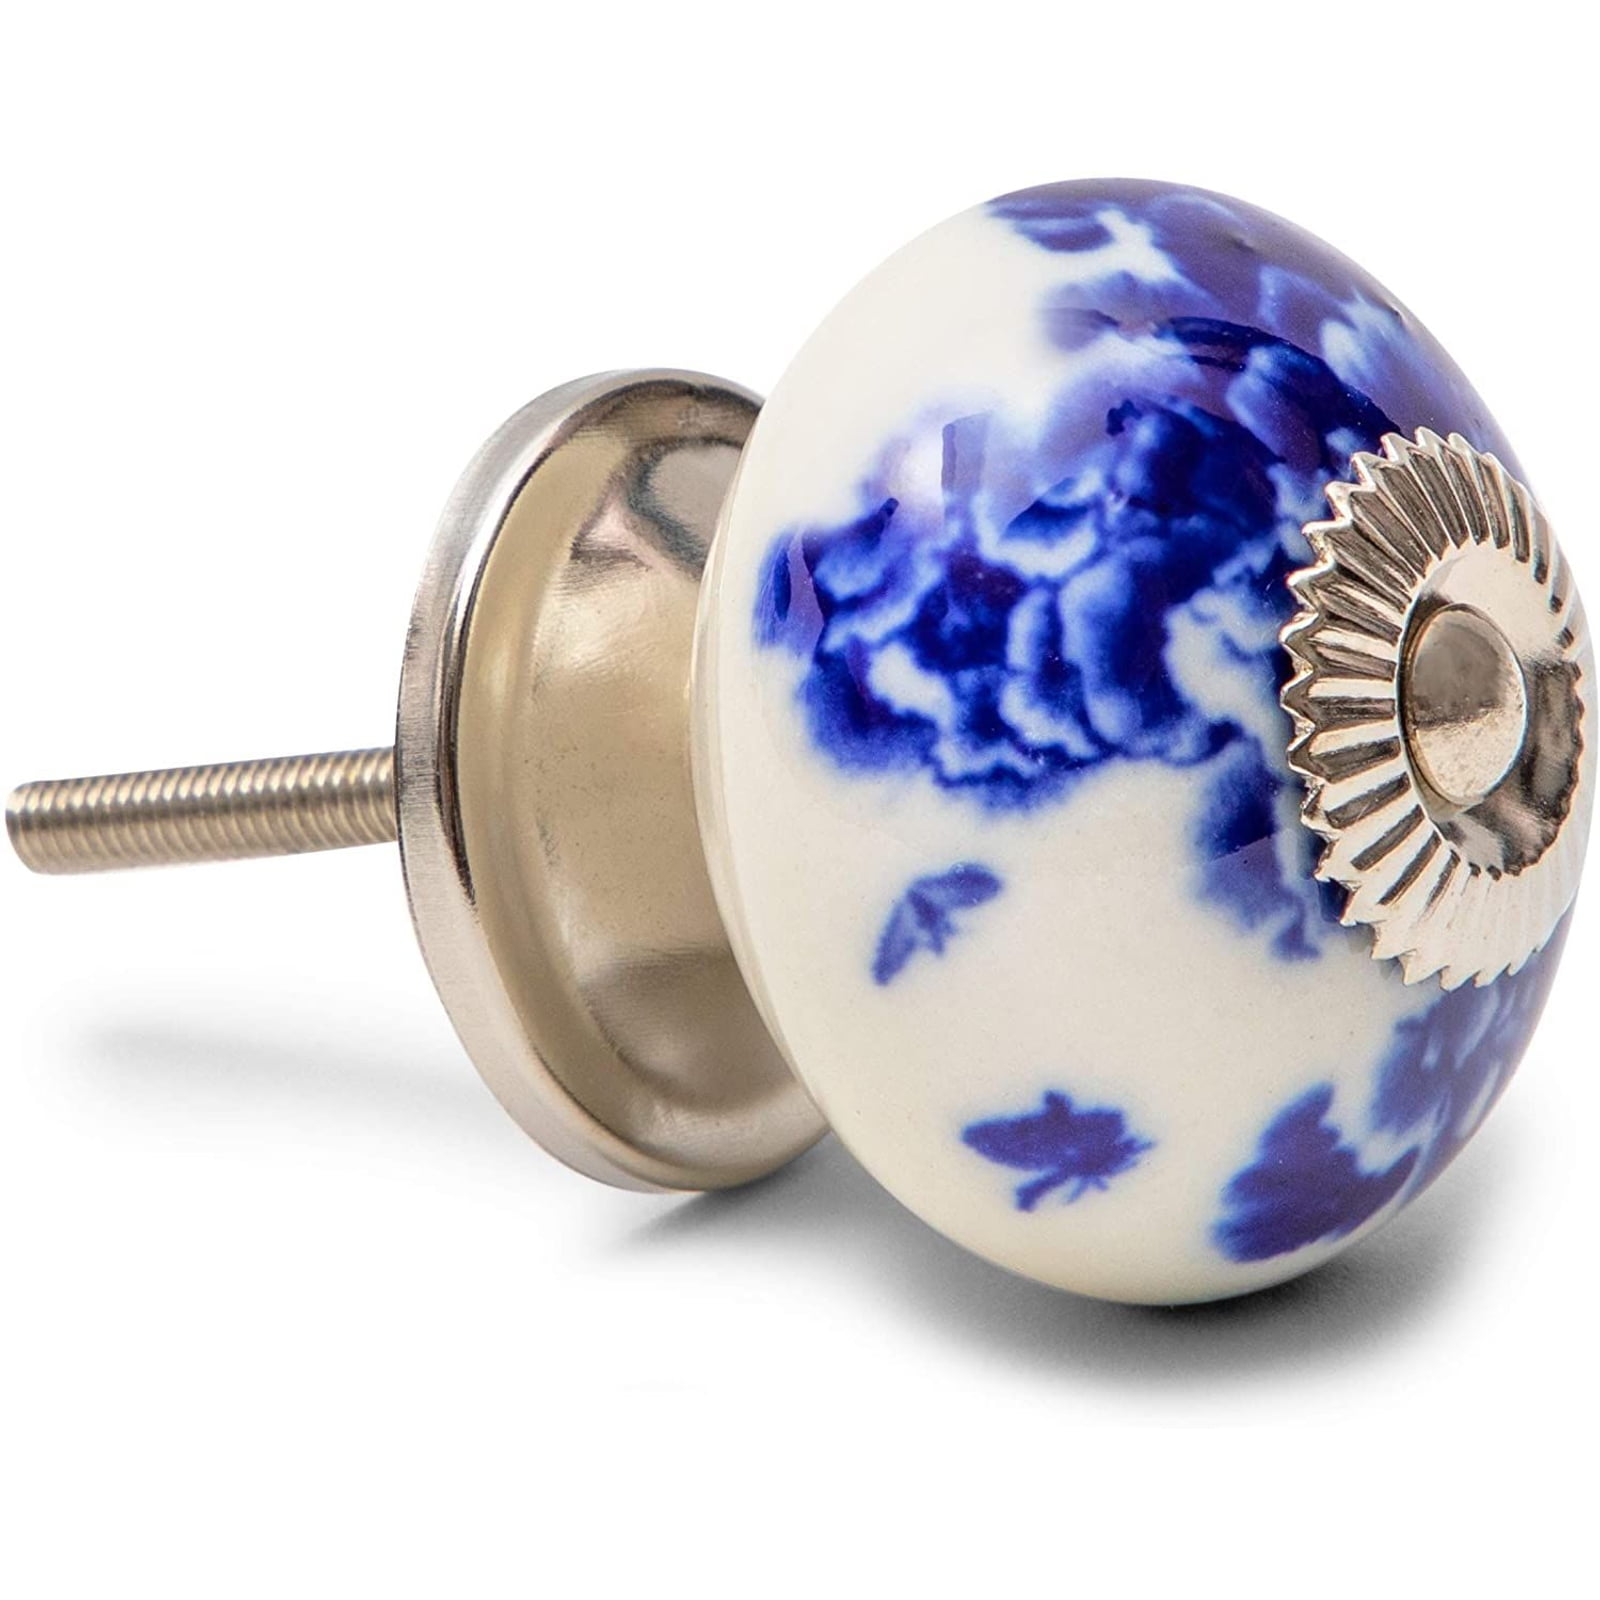 10 Blue and White Hand Painted Ceramic Knobs Cabinet Knobs Kitchen Cabinet Drawer Pull Handles by Zoyas lot of 10 knobs